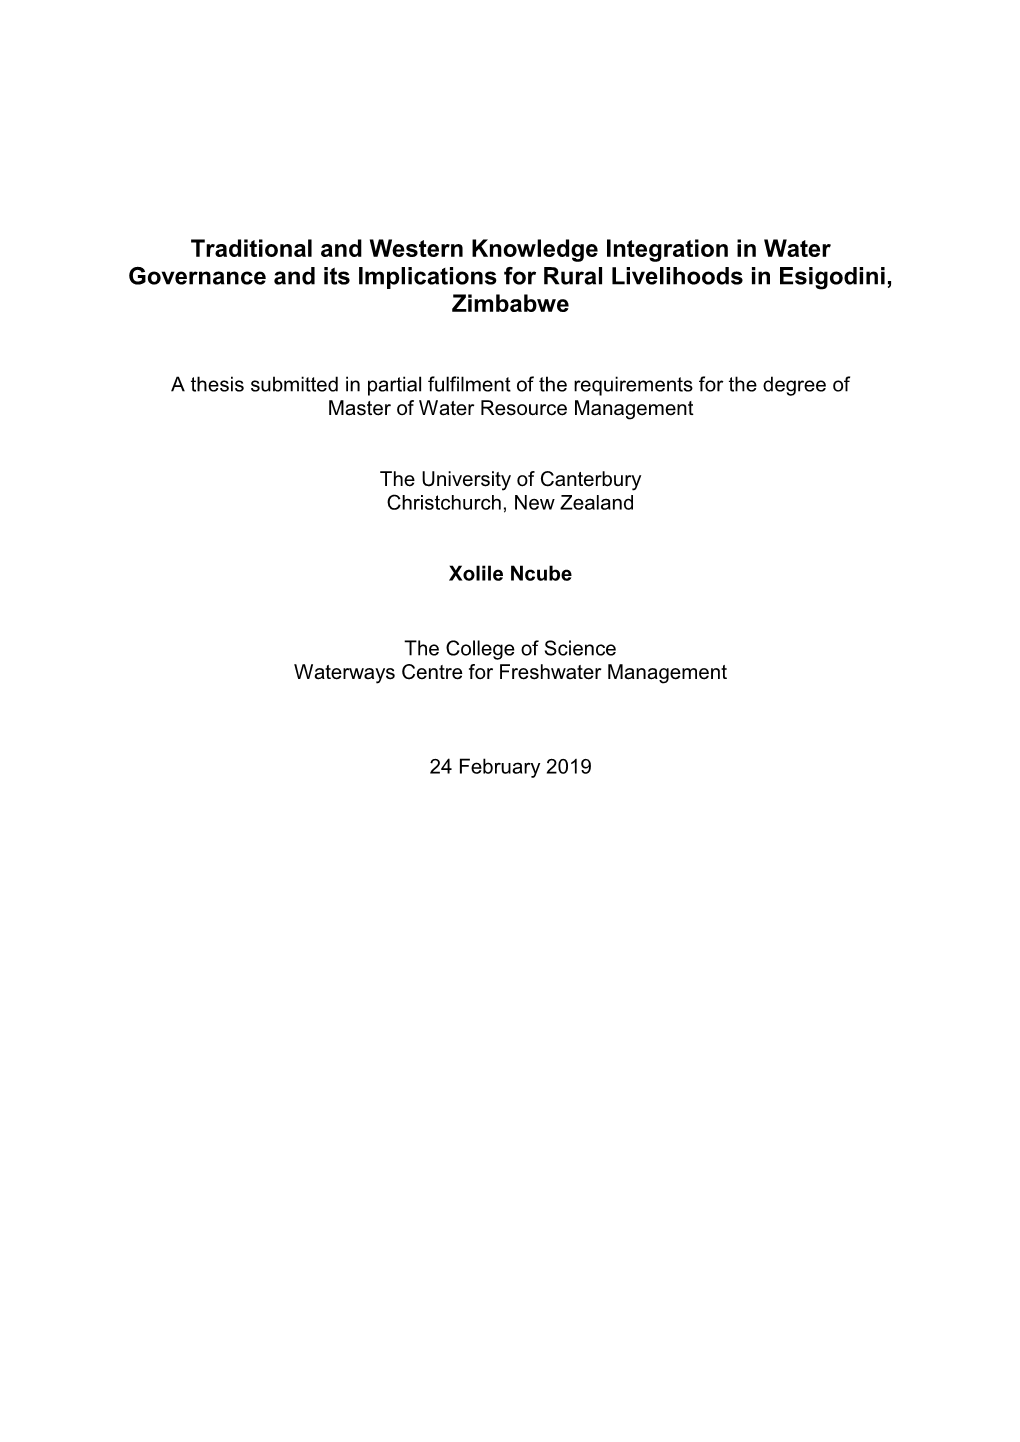 Traditional and Western Knowledge Integration in Water Governance and Its Implications for Rural Livelihoods in Esigodini, Zimbabwe